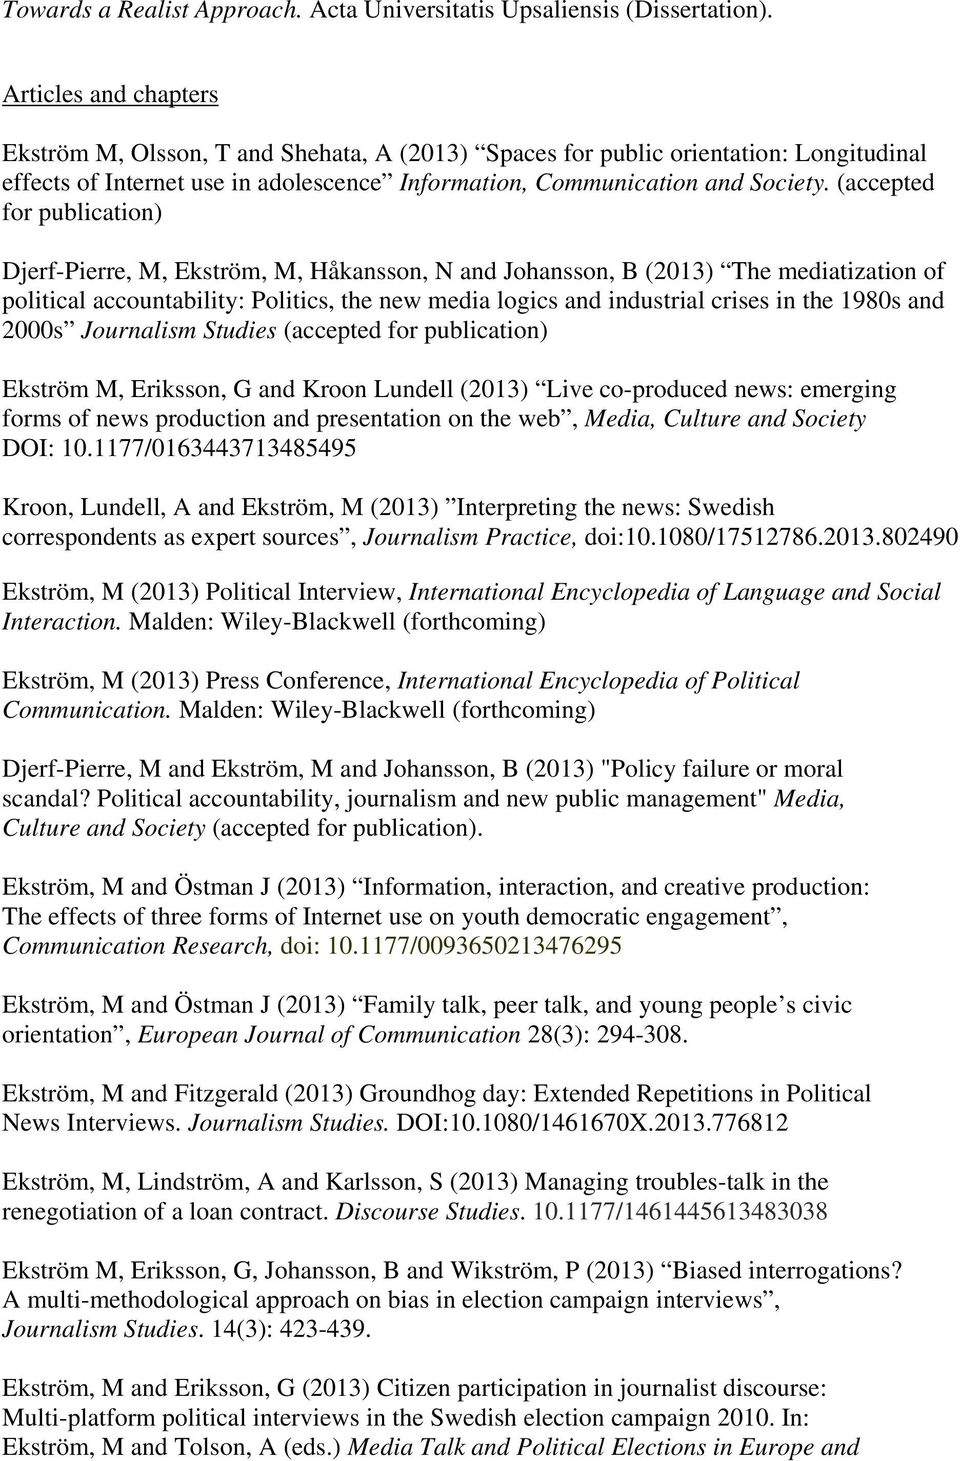 (accepted for publication) Djerf-Pierre, M, Ekström, M, Håkansson, N and Johansson, B (2013) The mediatization of political accountability: Politics, the new media logics and industrial crises in the